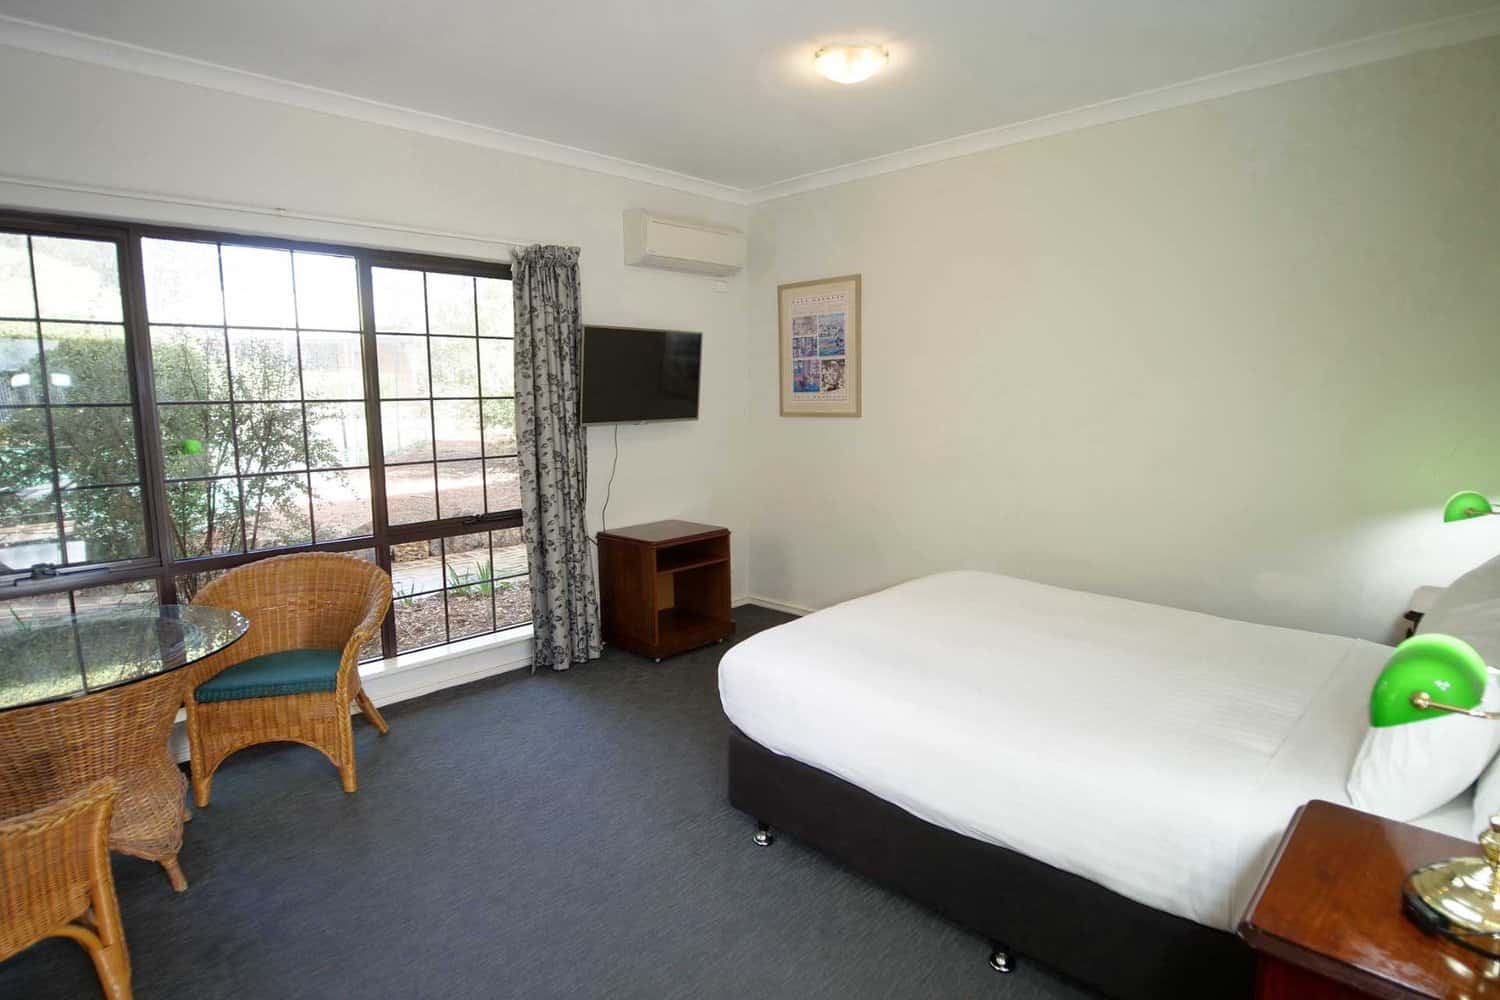 Complete hotel experience featuring a cozy queen size bed, functional table and chairs, modern TV, and convenient air conditioning for ultimate guest comfort.